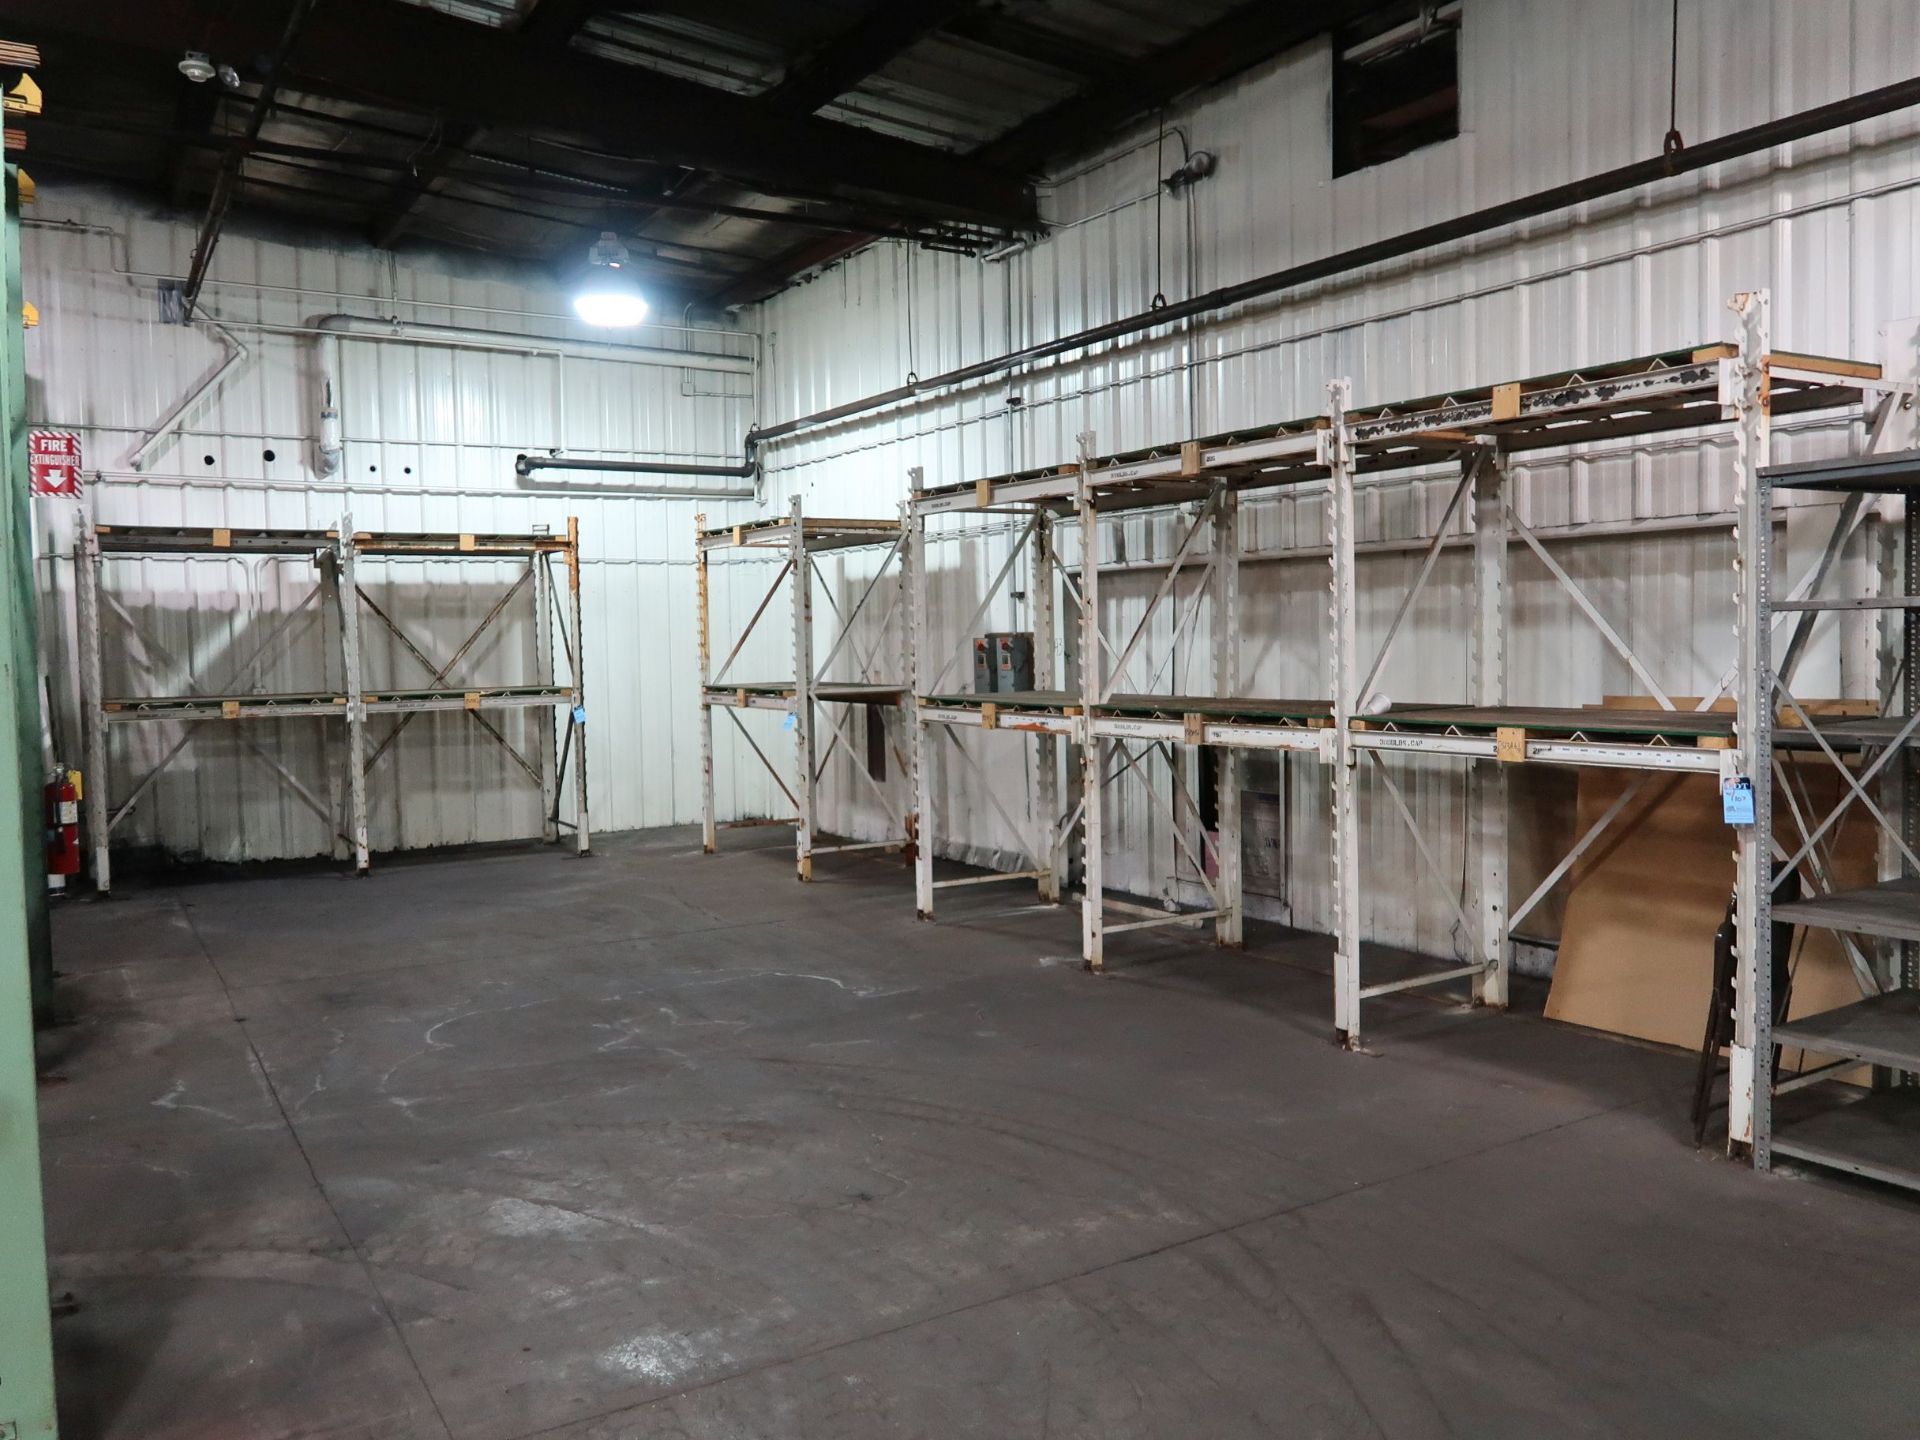 SECTIONS 38" X 64" X 108" ADJUSTABLE BEAM PALLET RACK, (12) 38" X 108" UPRIGHTS, (16) 38" X 64"